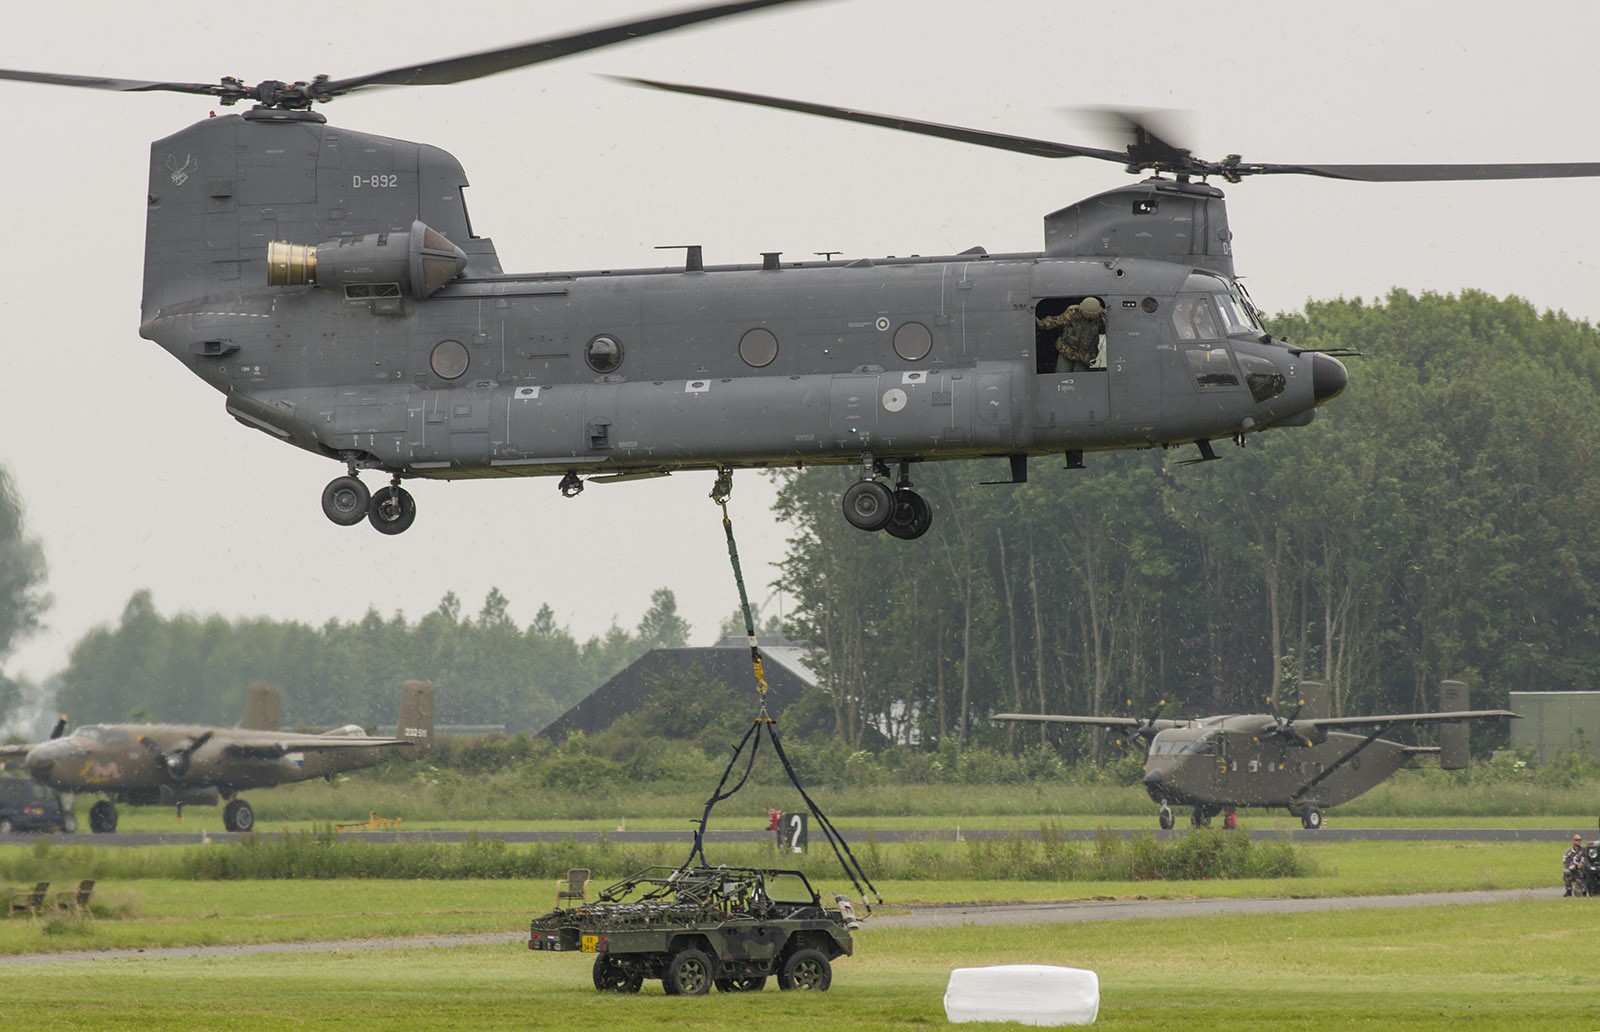 Amazing facts about Boeing CH-47 Chinook; The Military Helicopter